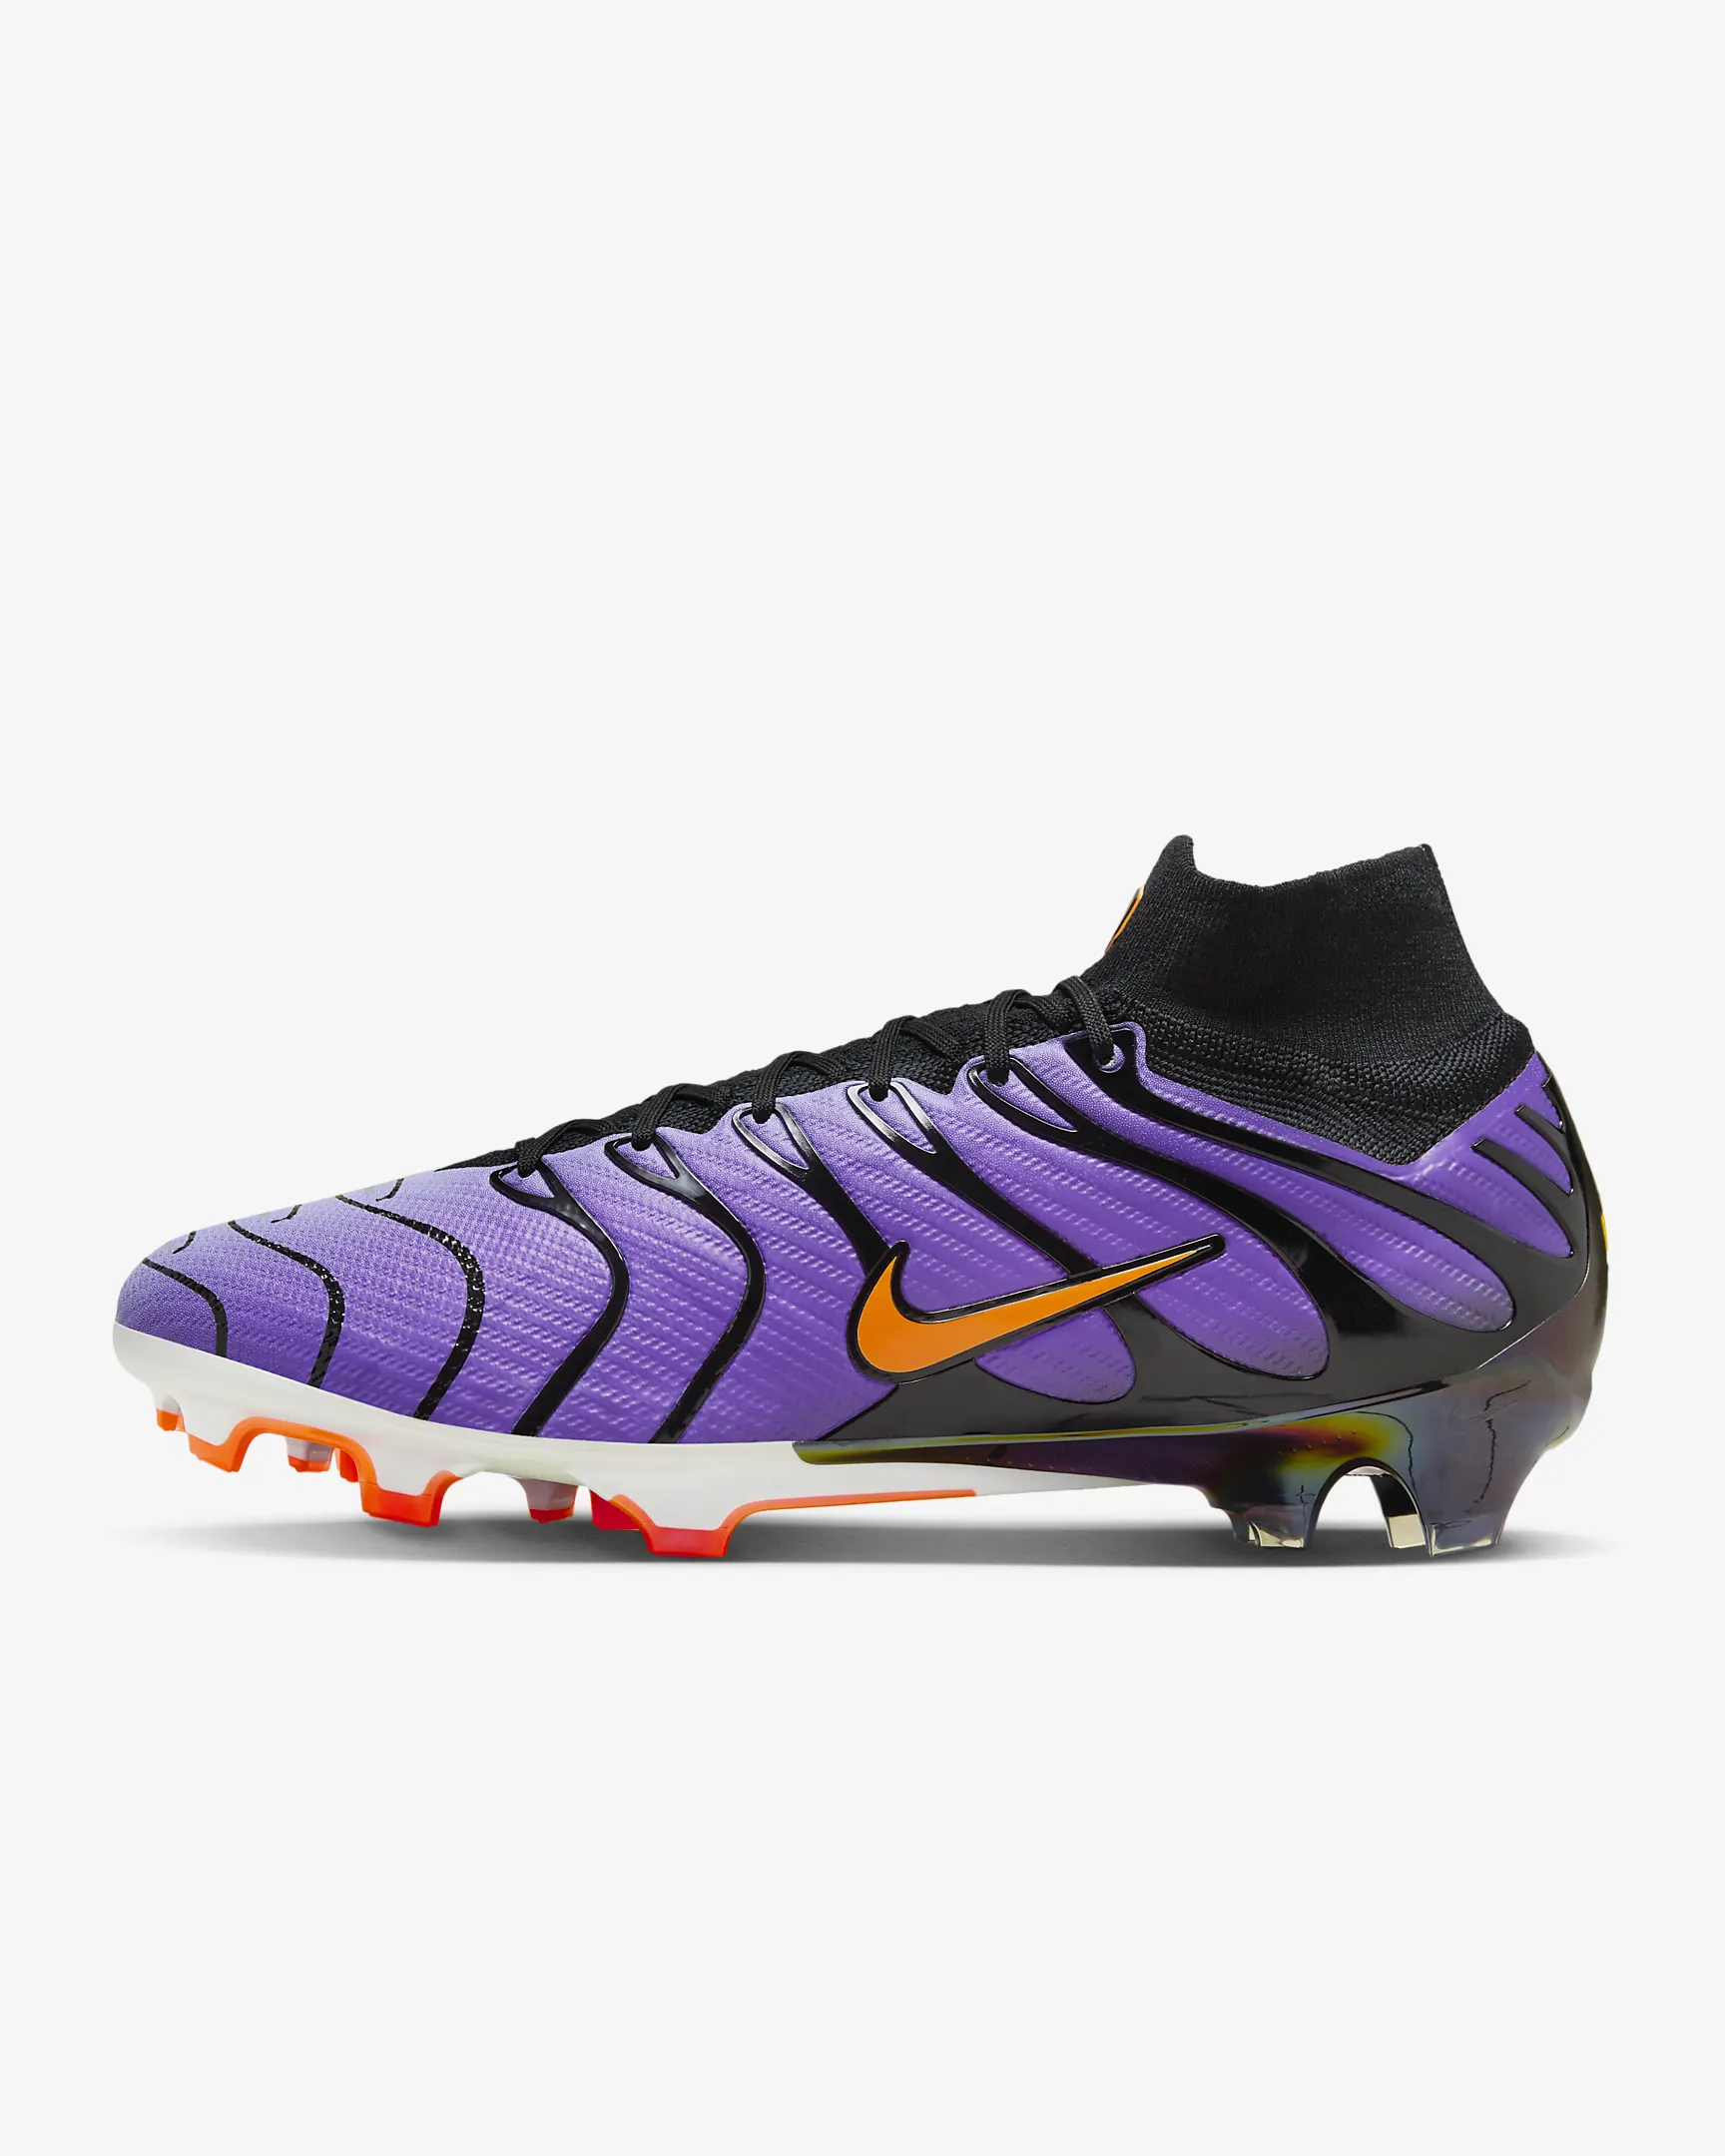 Nike Mercurial Superfly 9 FG 'Voltage Purple' releases GOAT